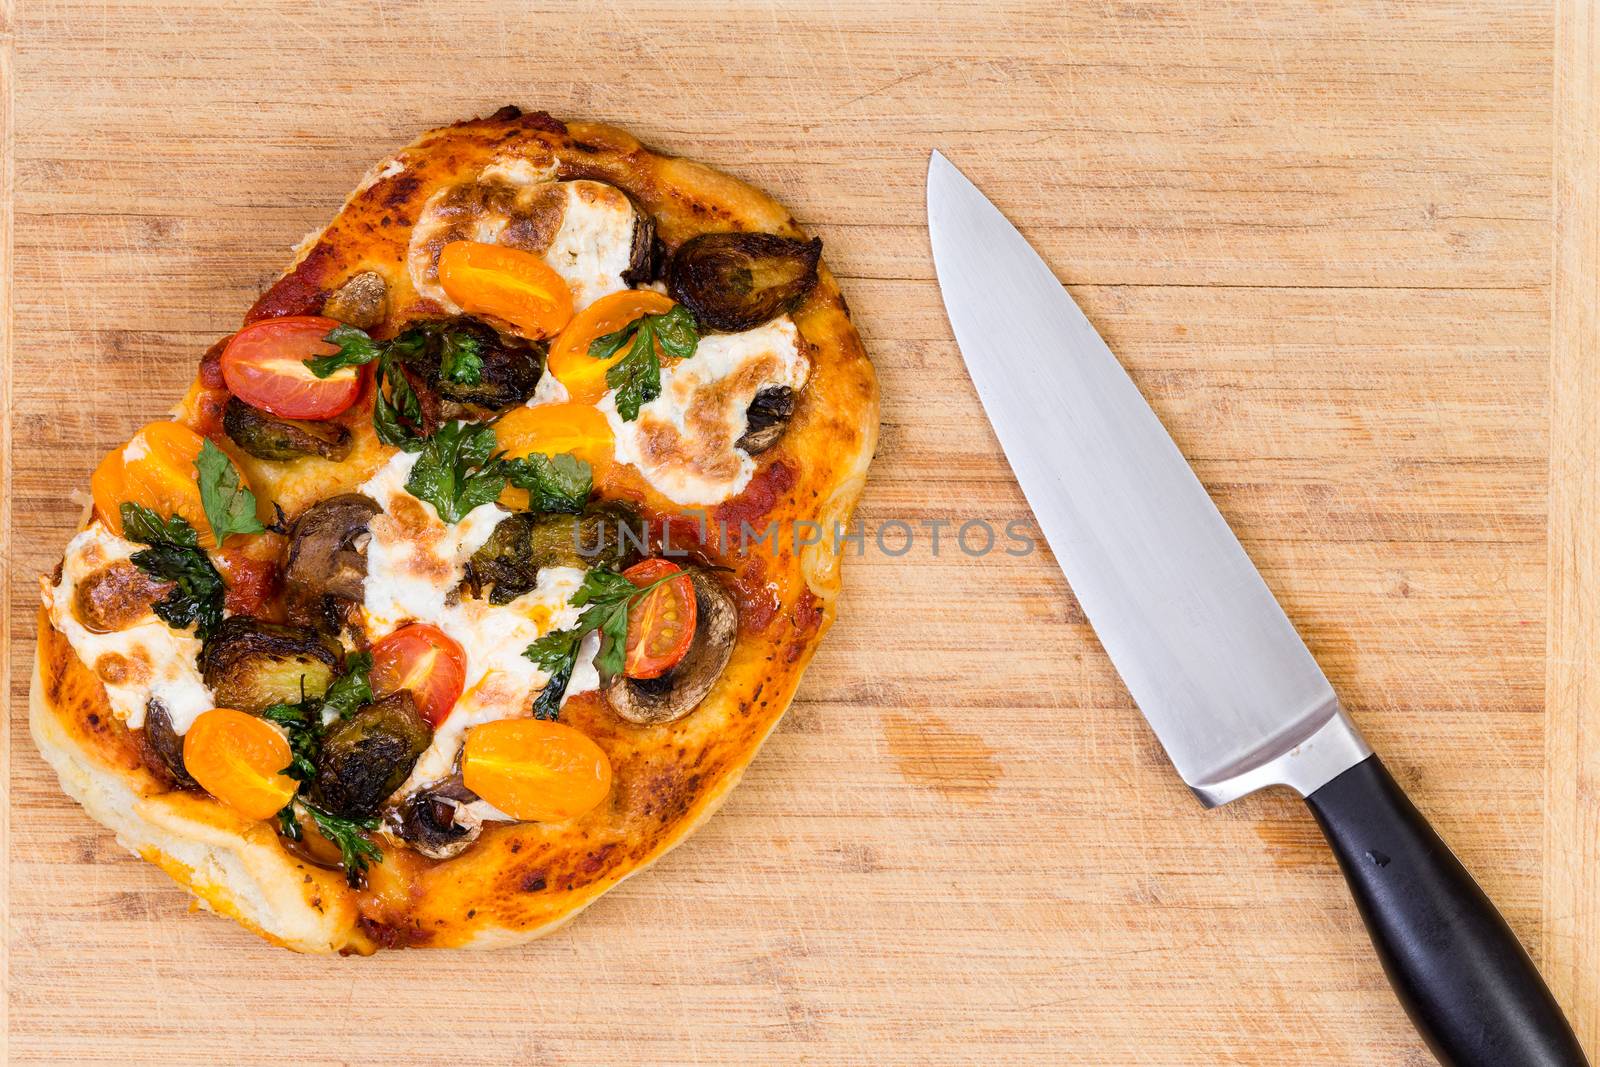 Freshly baked hand tossed vegetarian pizza by coskun